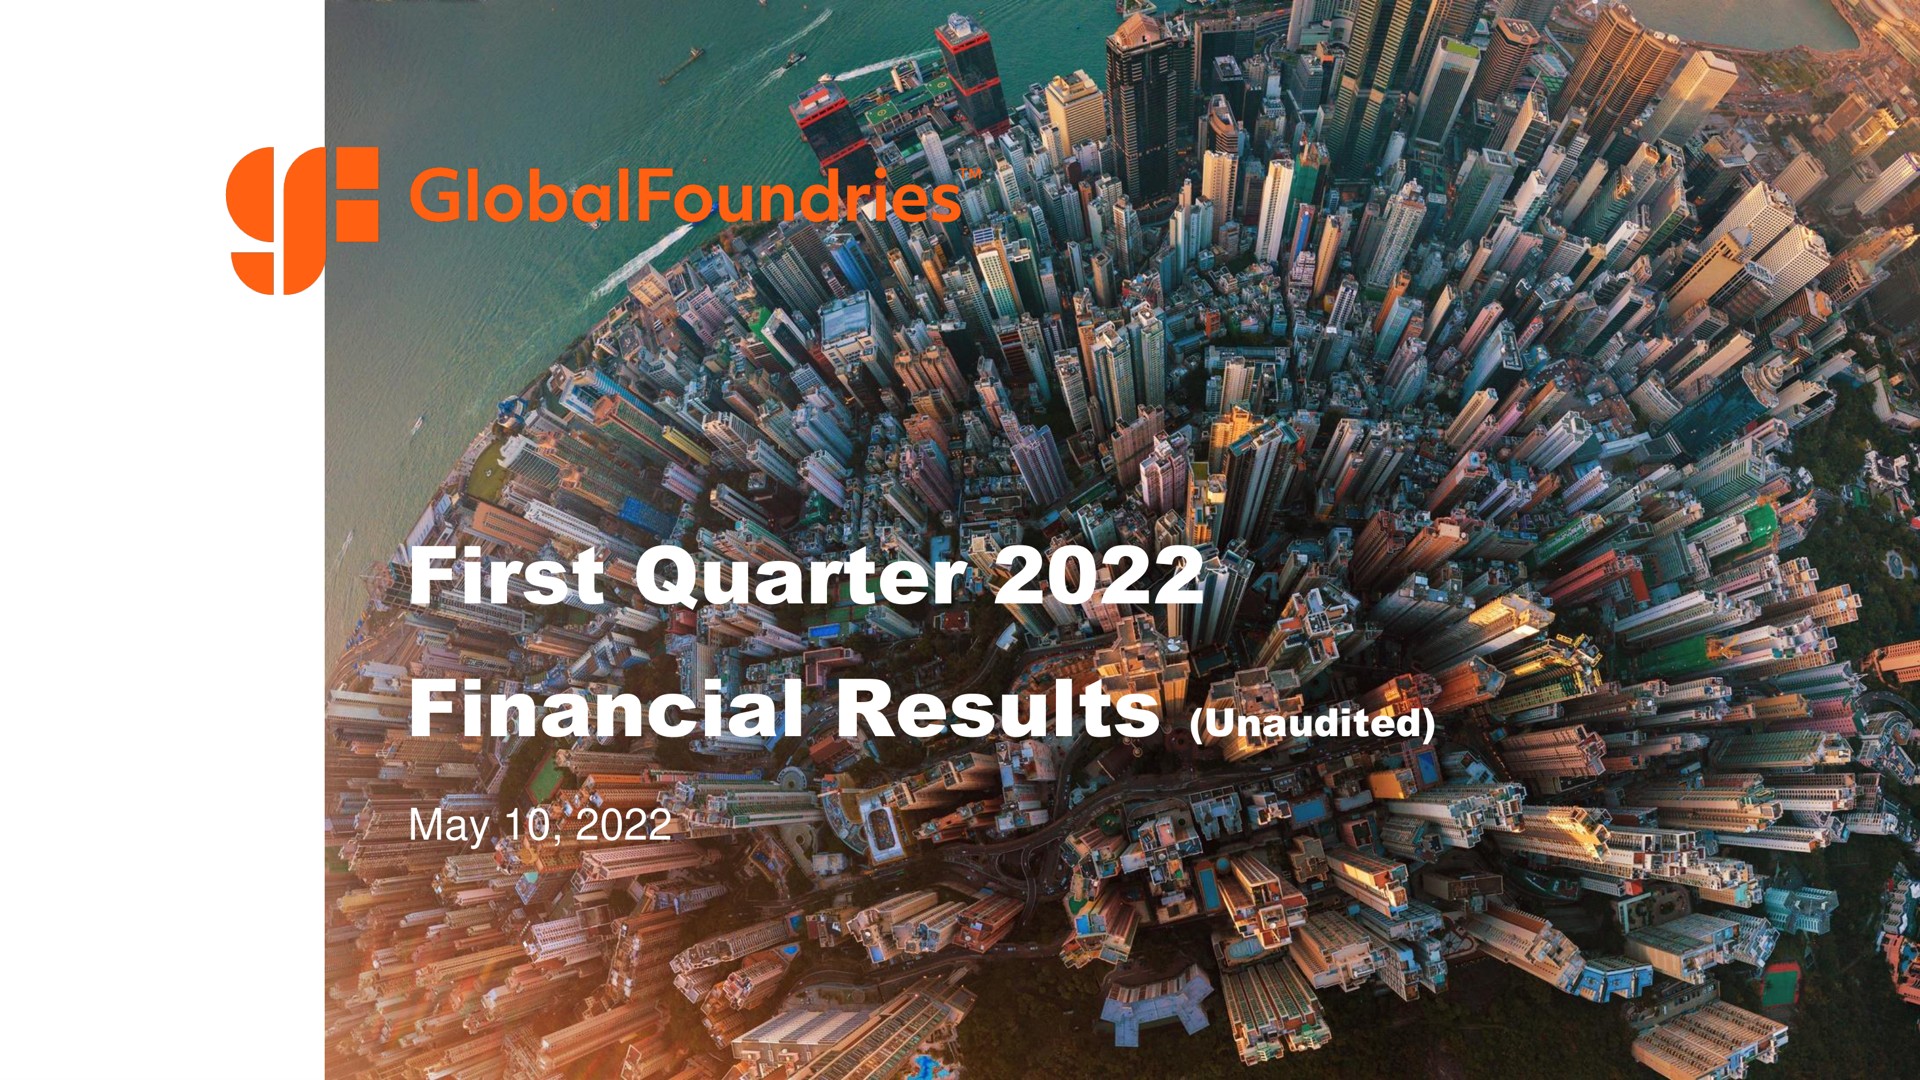 first quarter financial results unaudited may creat poe | GlobalFoundries